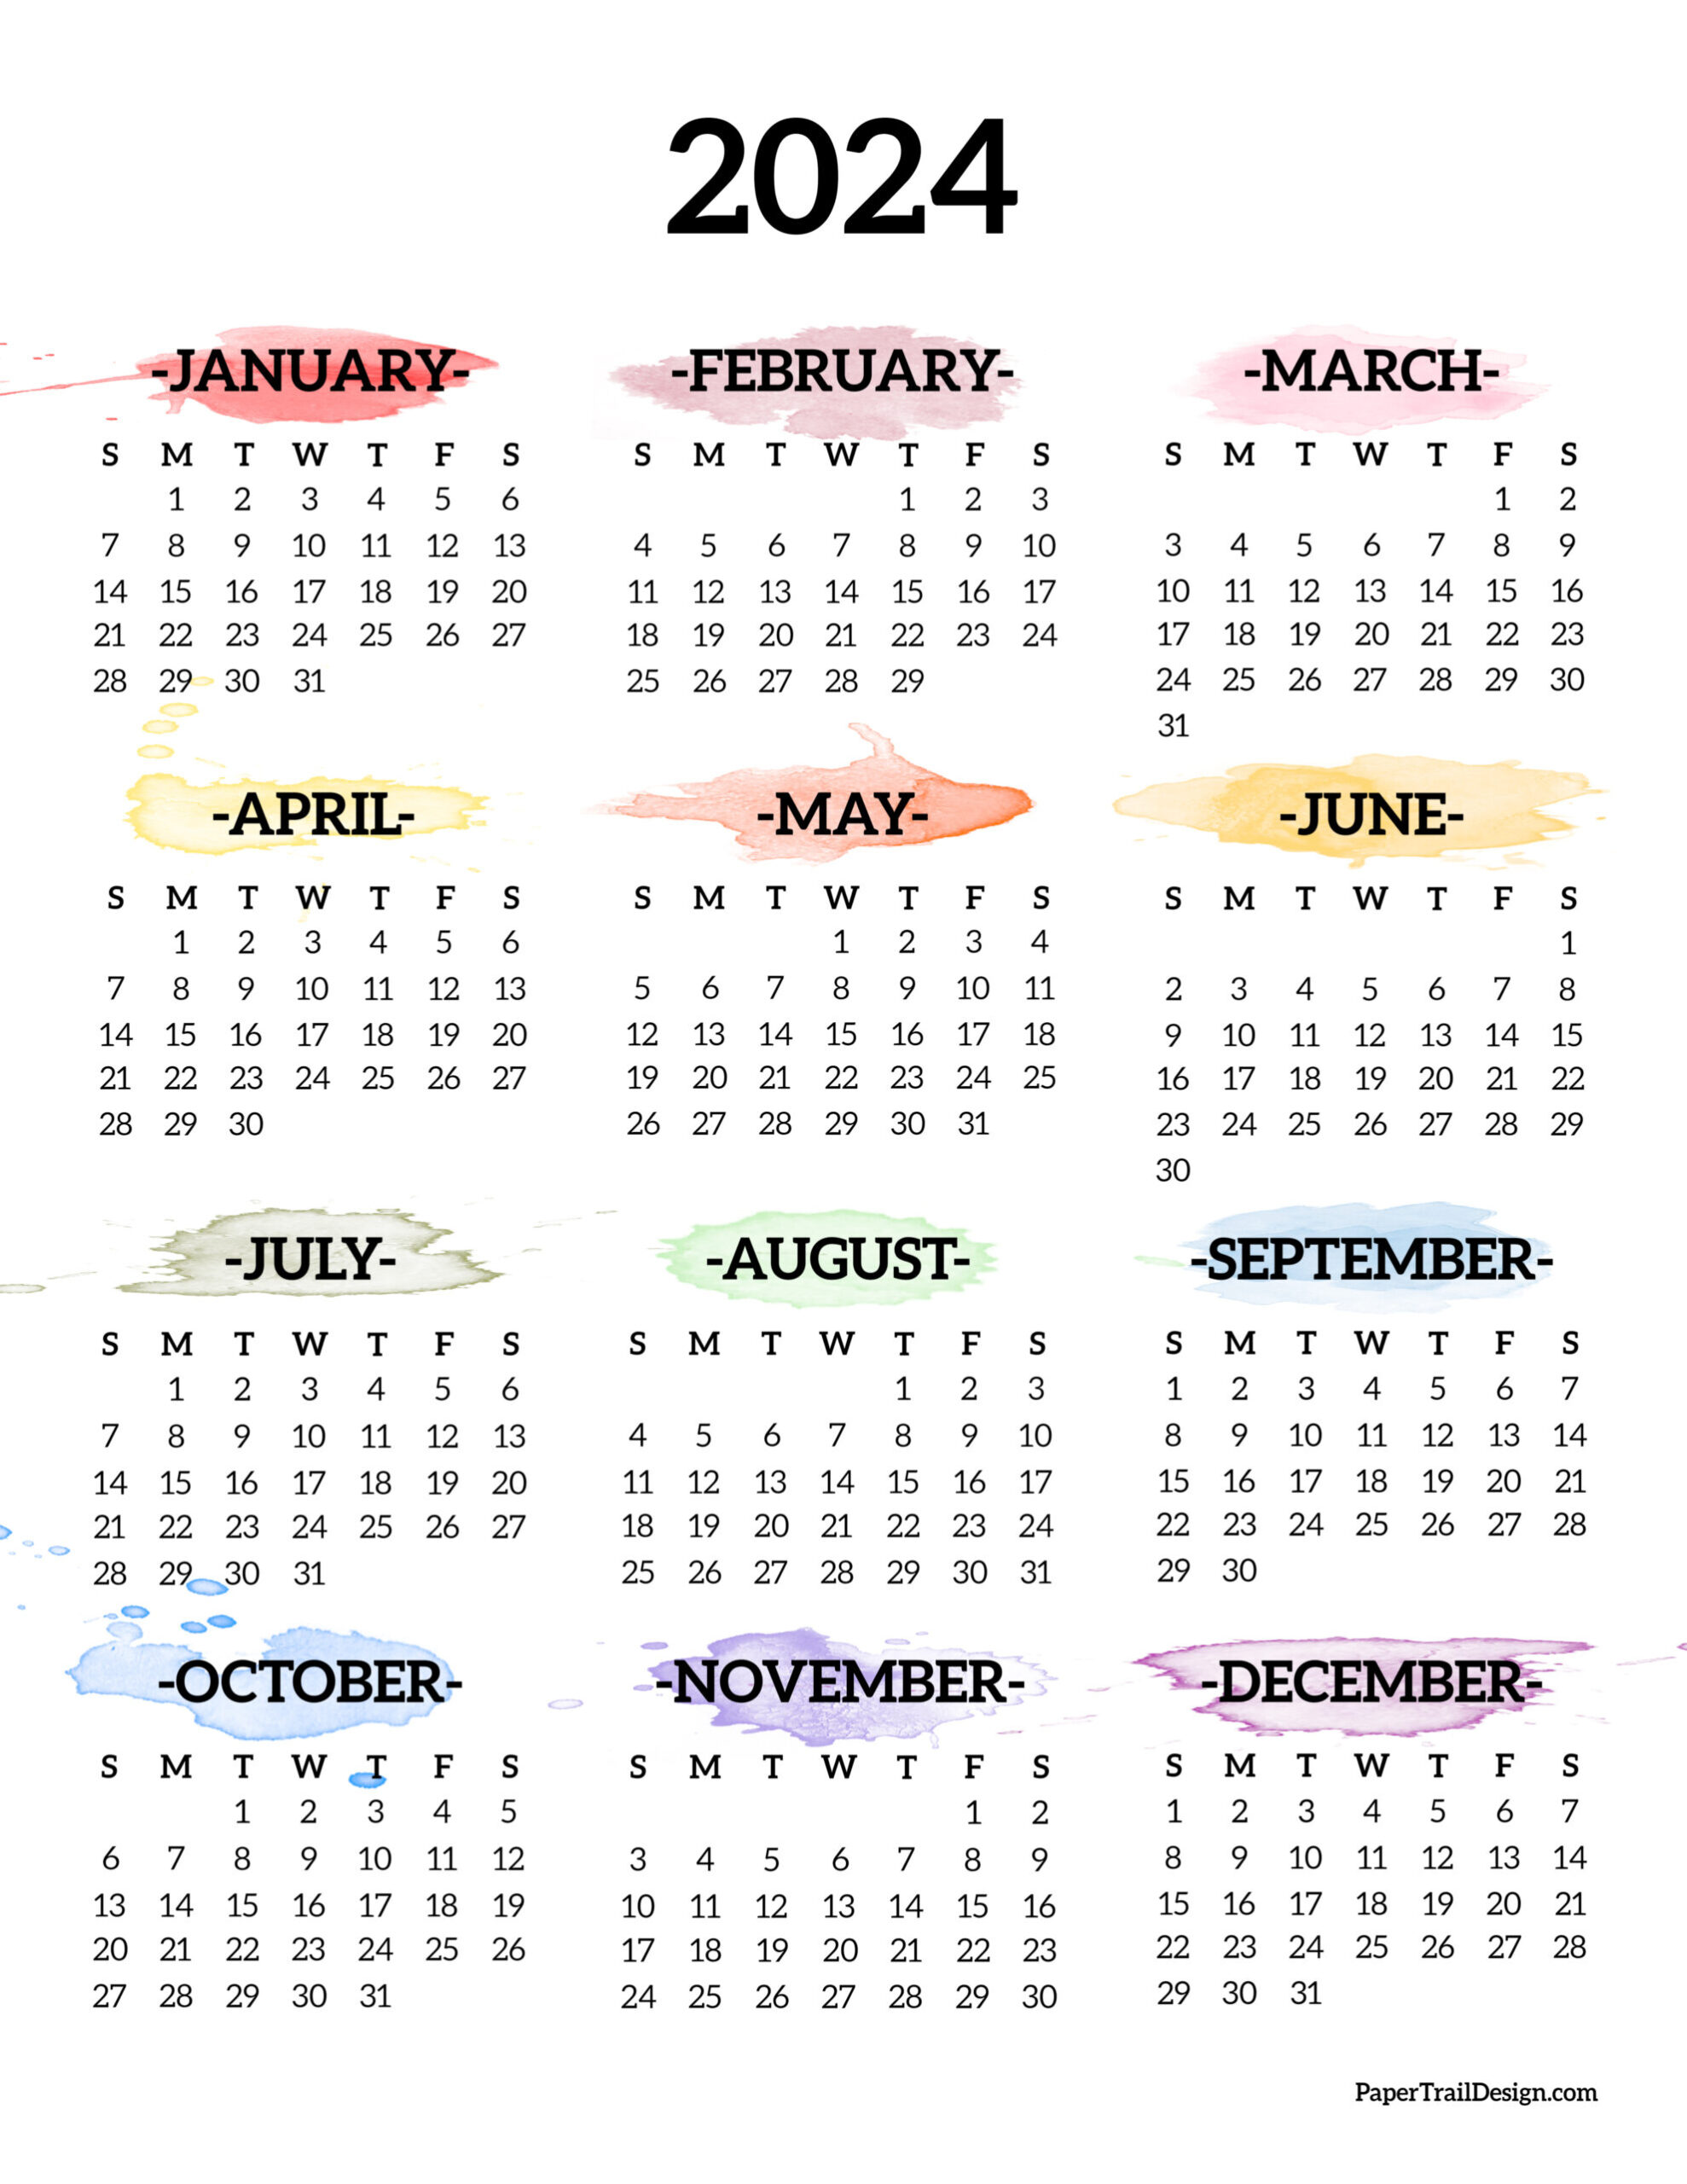 Calendar 2024 Printable One Page - Paper Trail Design | 2024 Yearly Calendar Image